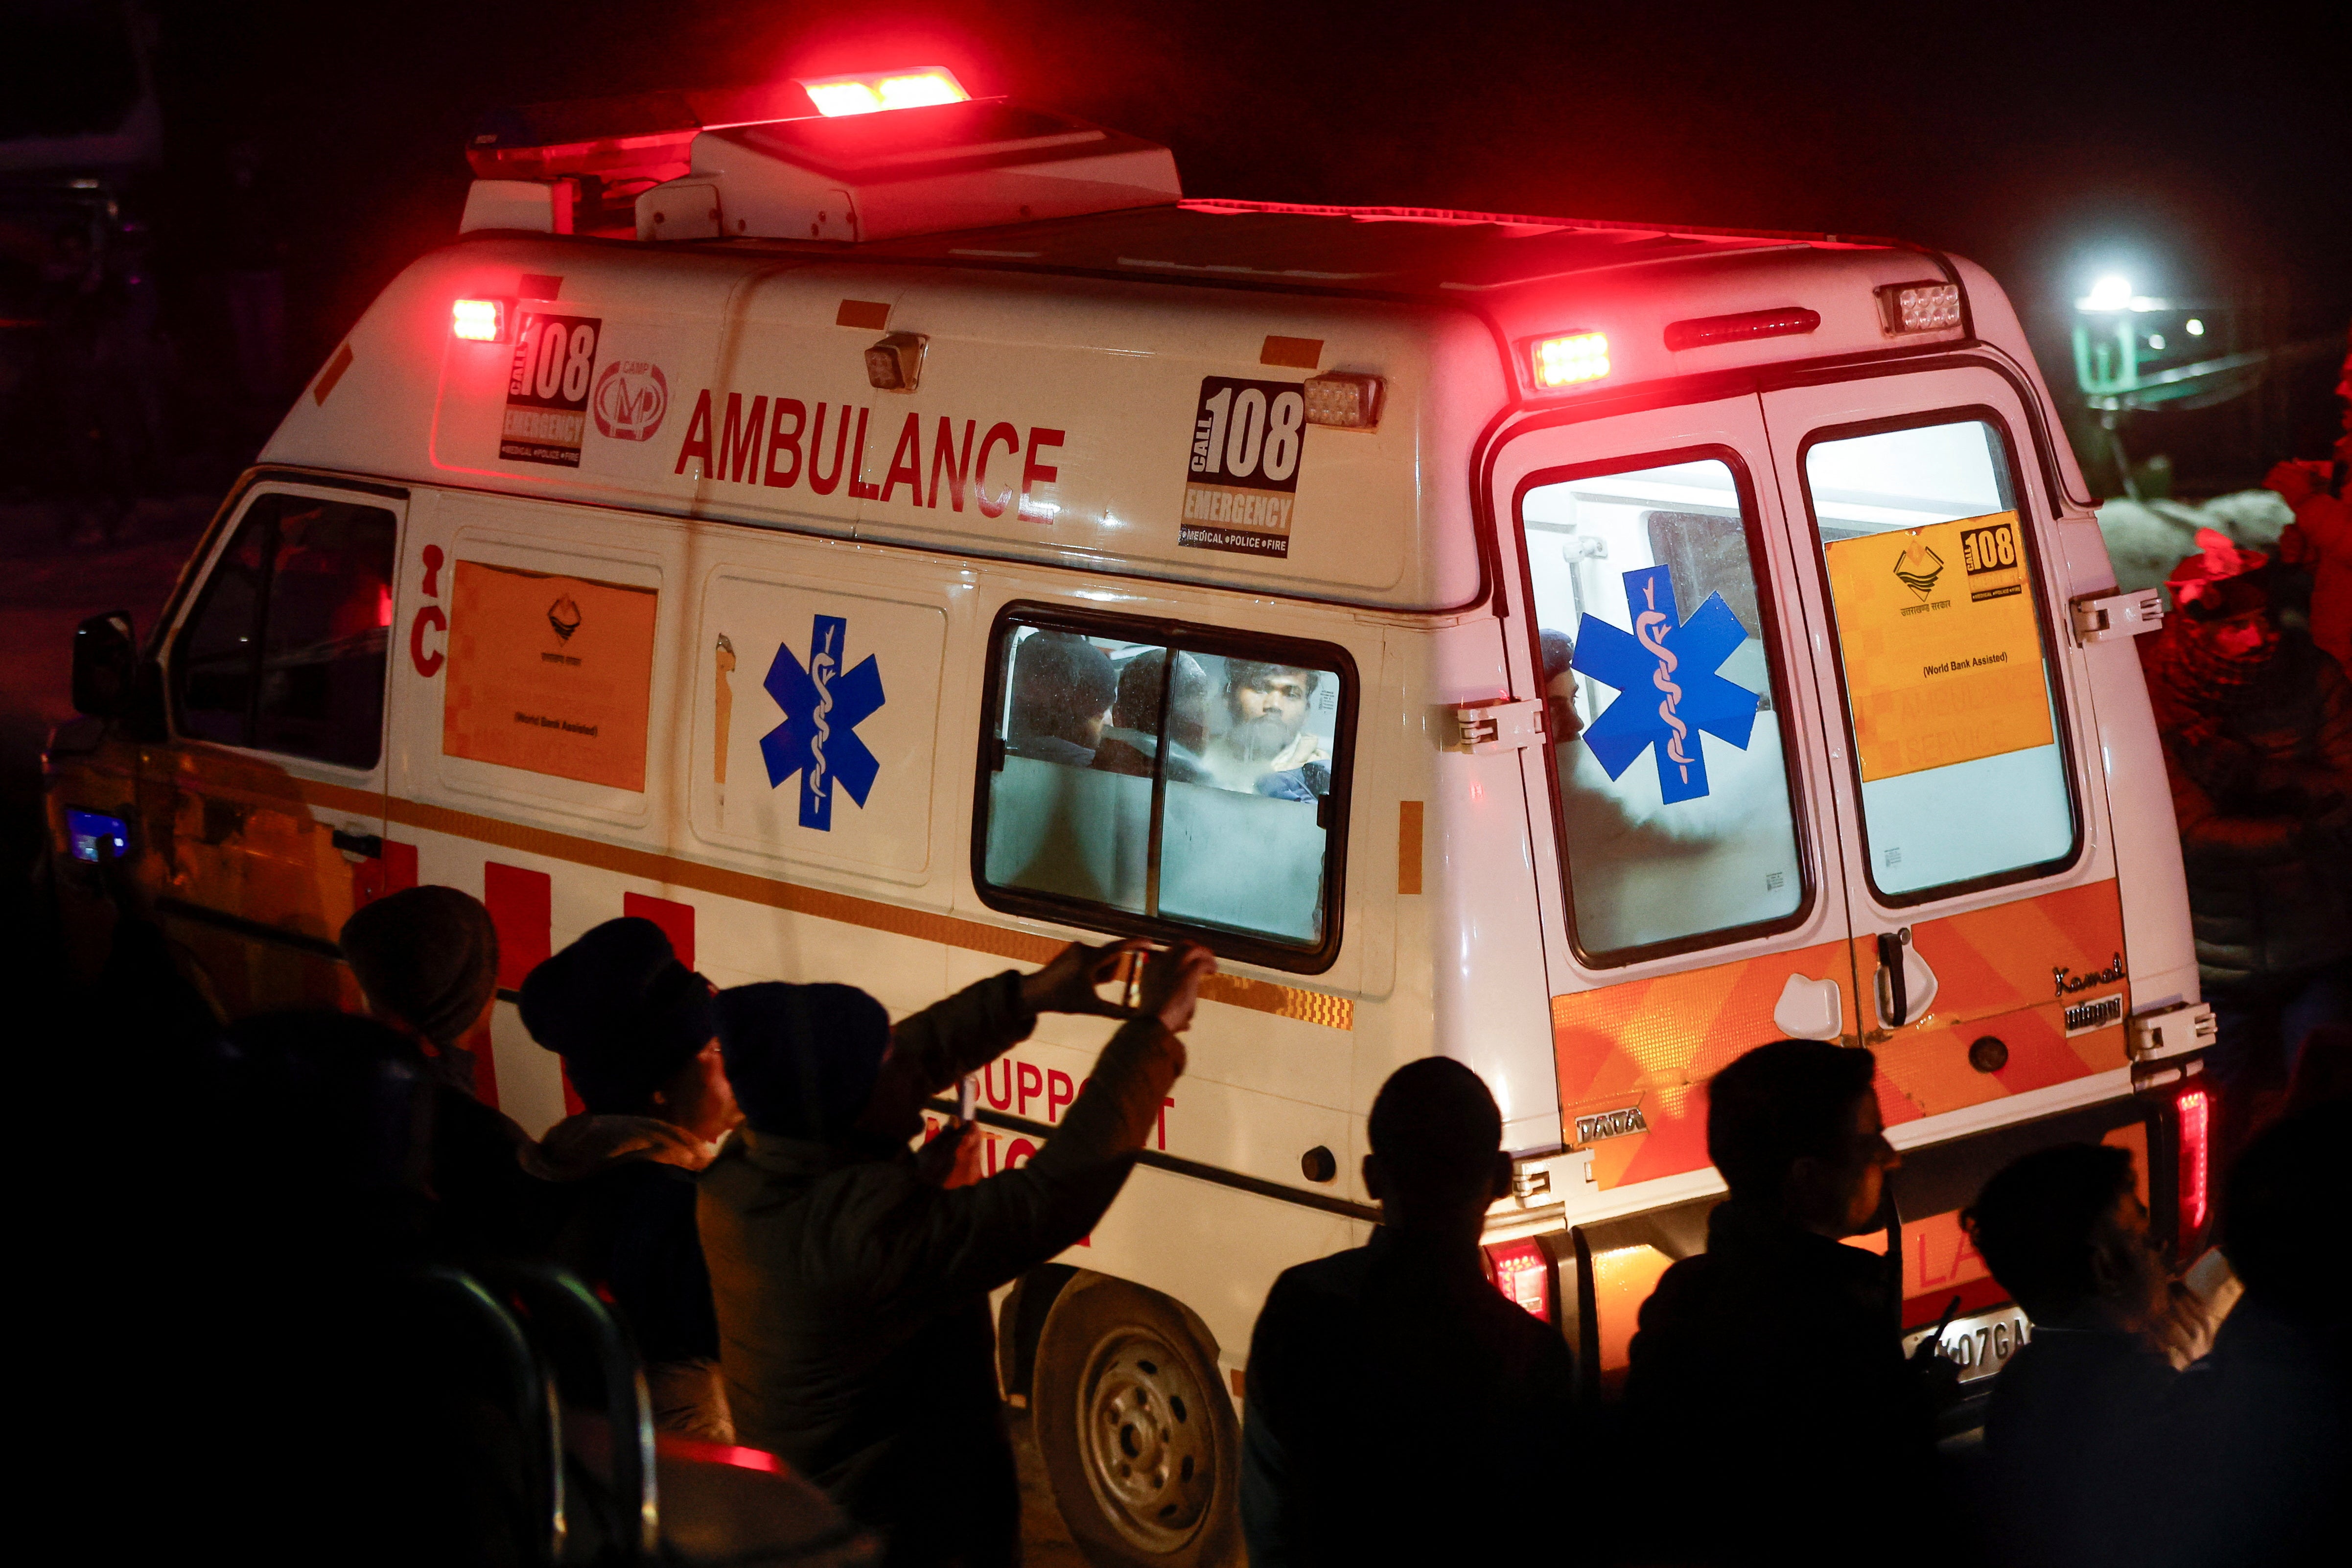 Ambulance carries survivors to receive medical support